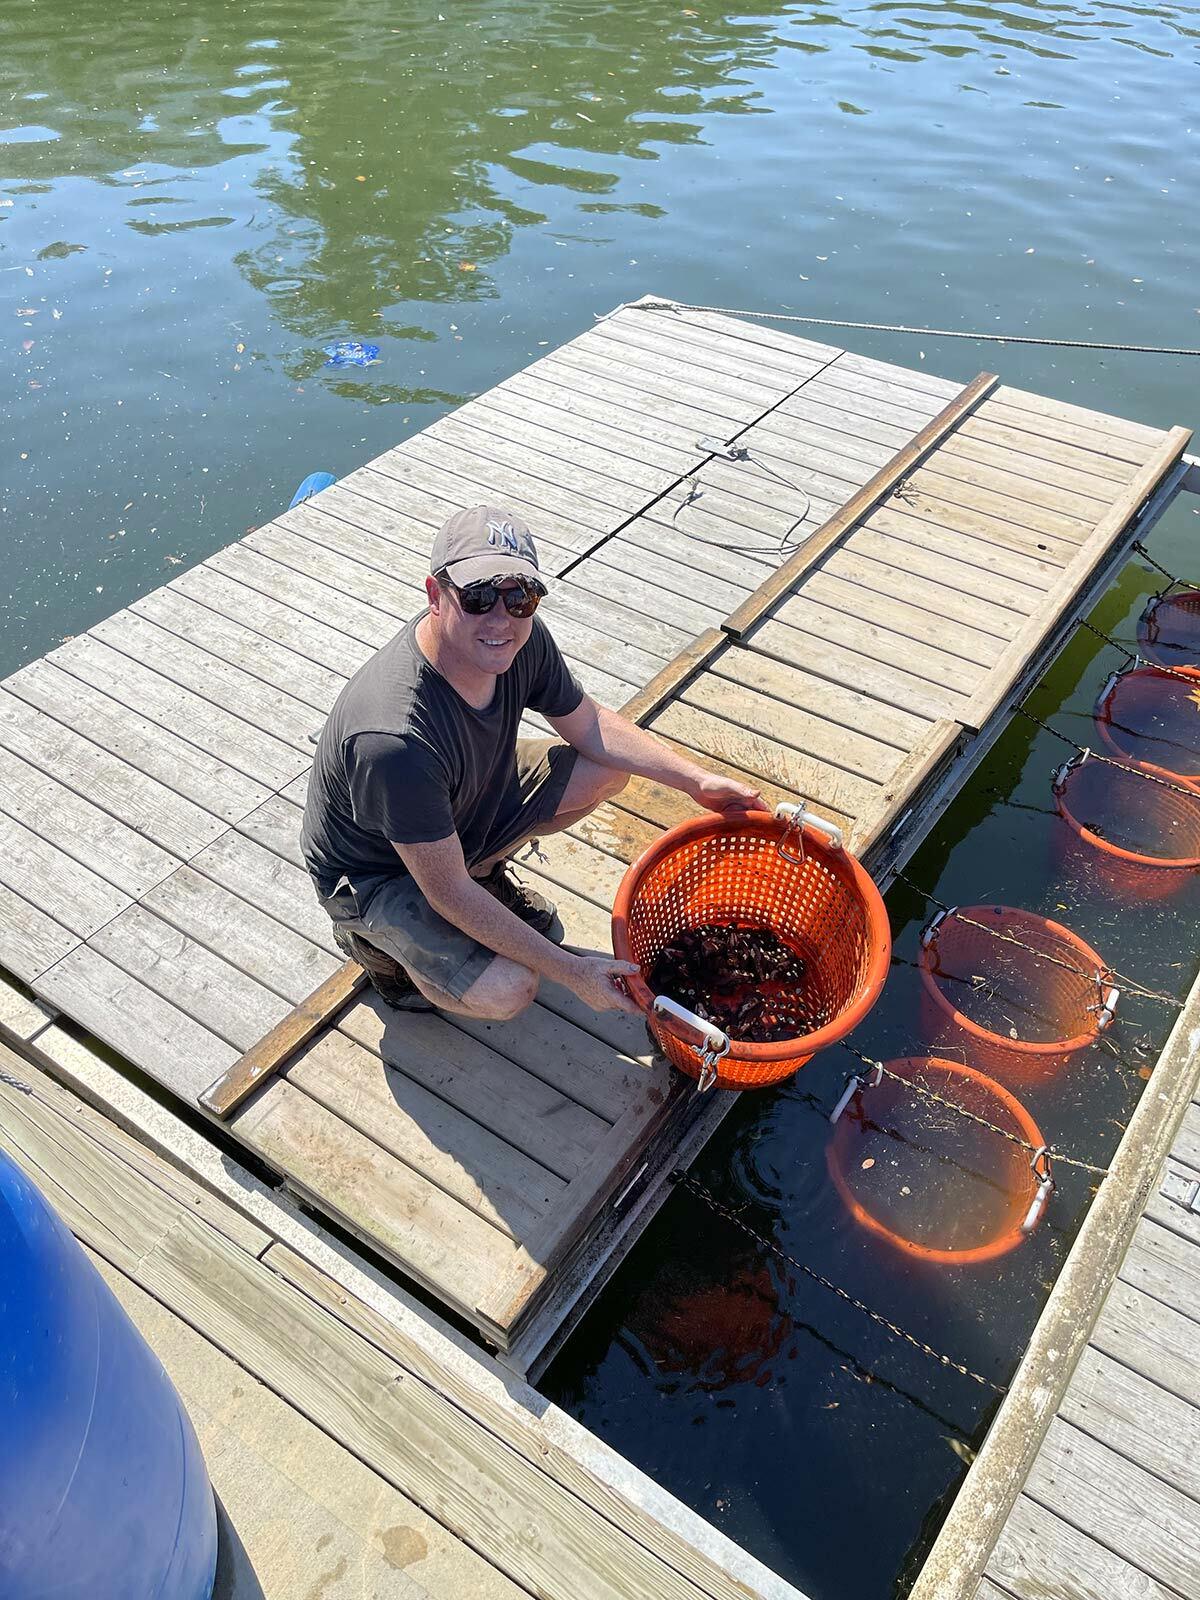 On-site supervisor Sean Tamaro shows off the ribbed mussels at Woodbine Marina, which will be tested for potential use as animal feed in the future.